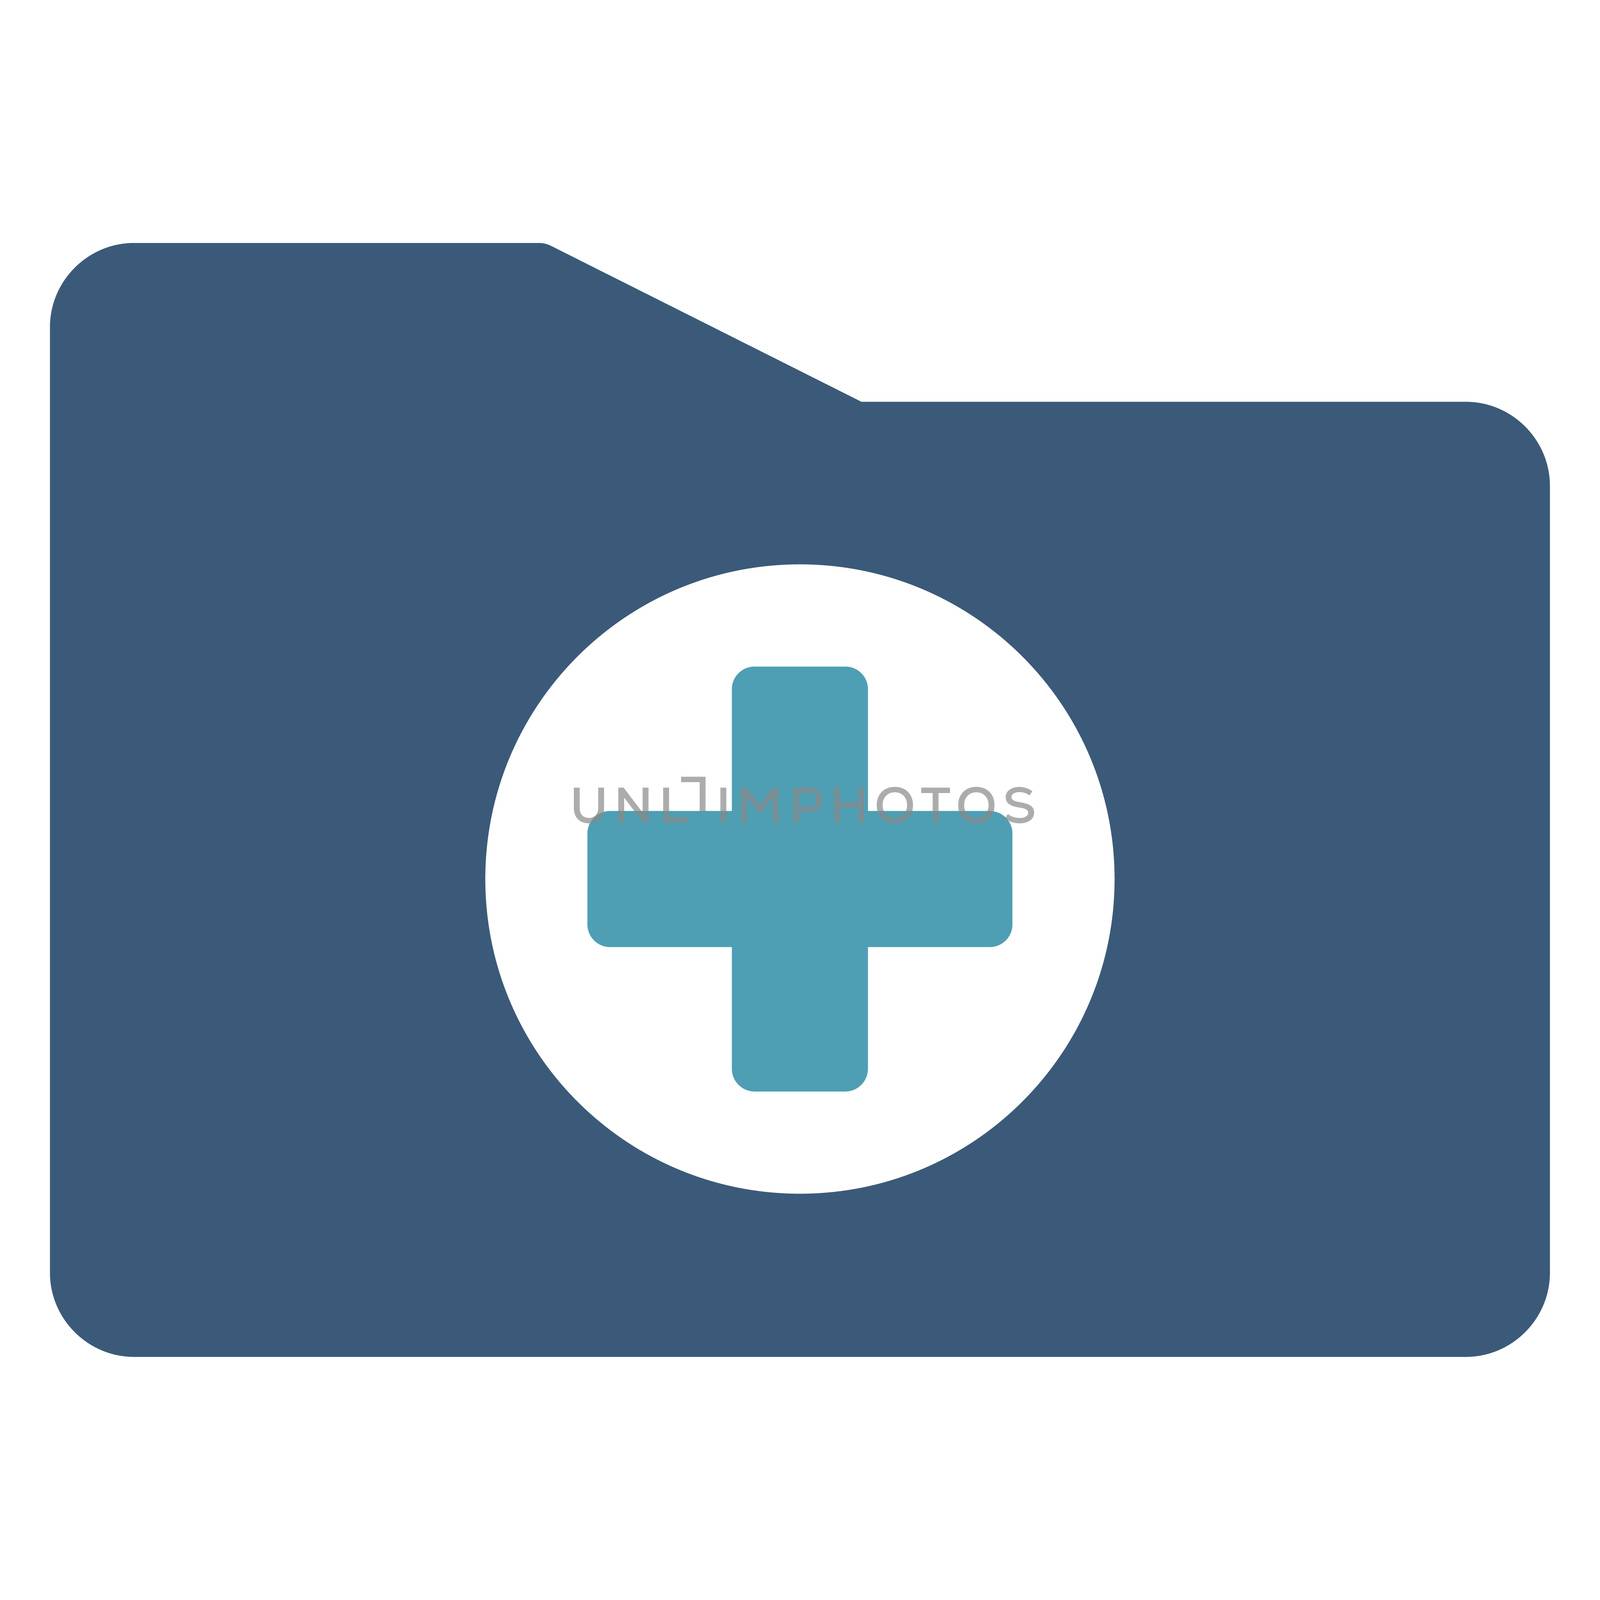 Medical Folder raster icon. Style is bicolor flat symbol, cyan and blue colors, rounded angles, white background.